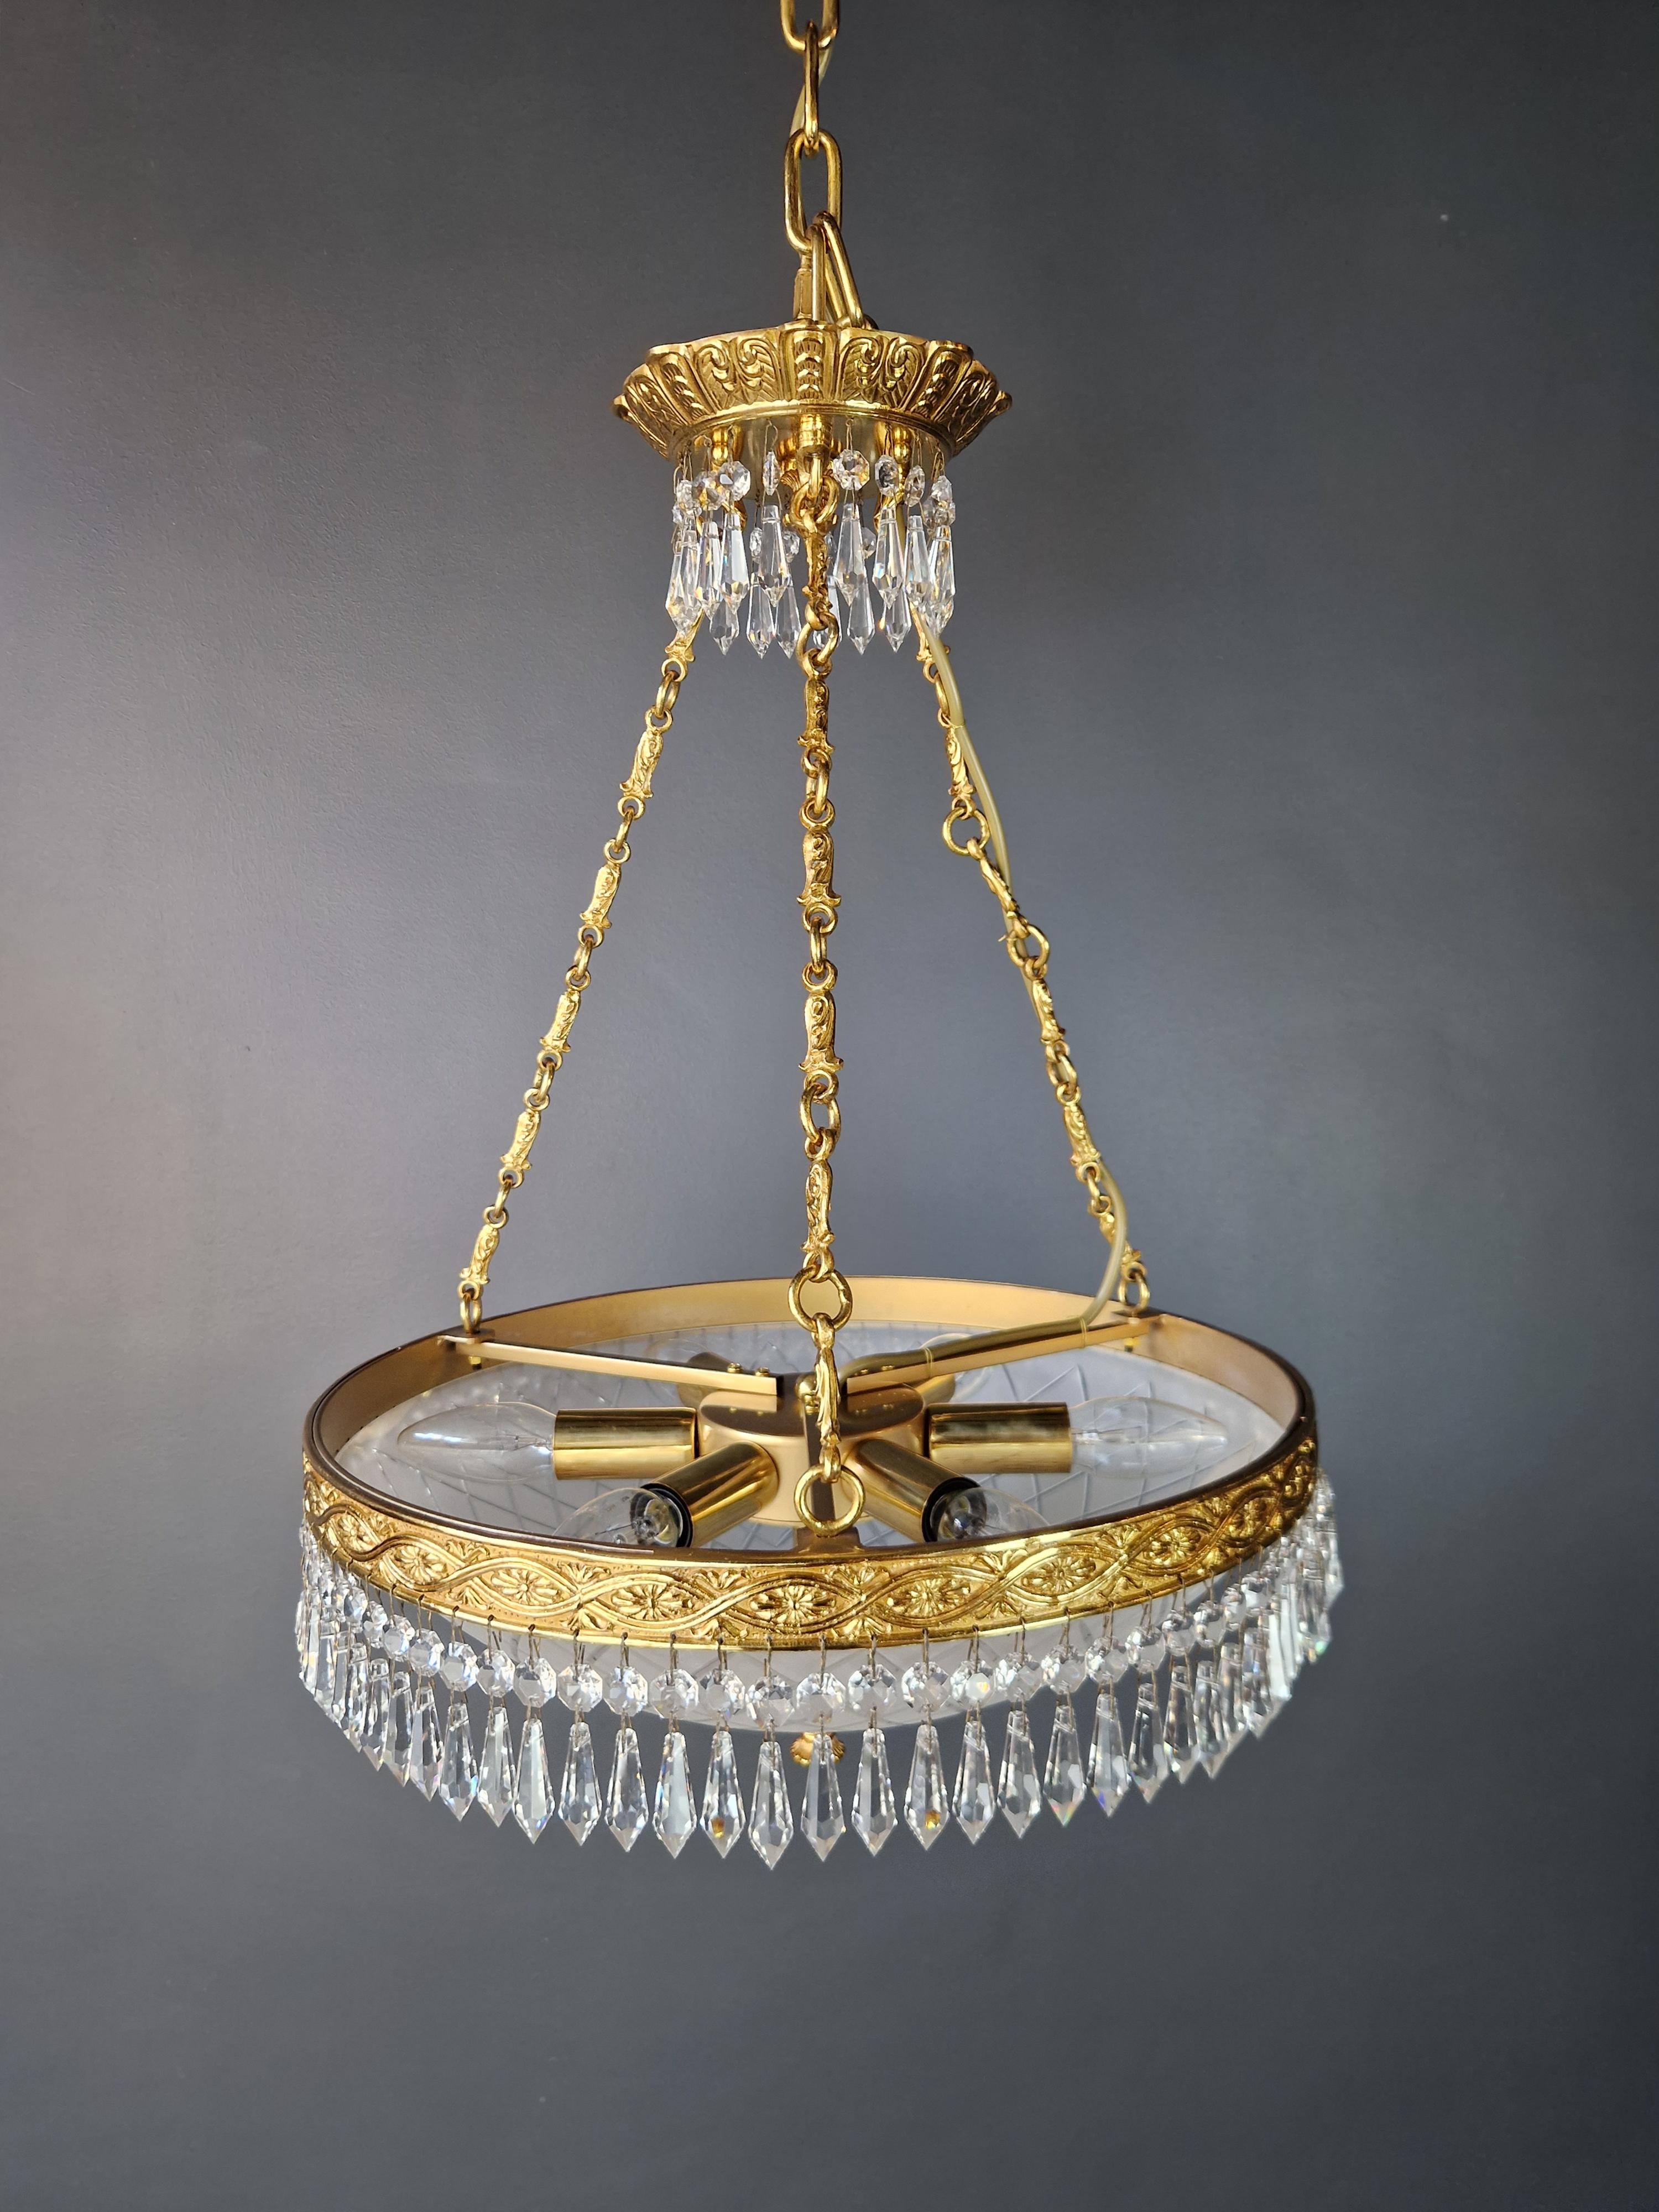 Contemporary Brass Basket Classical Chandelier Crystal Lustre Lamp Antique Gold For Sale